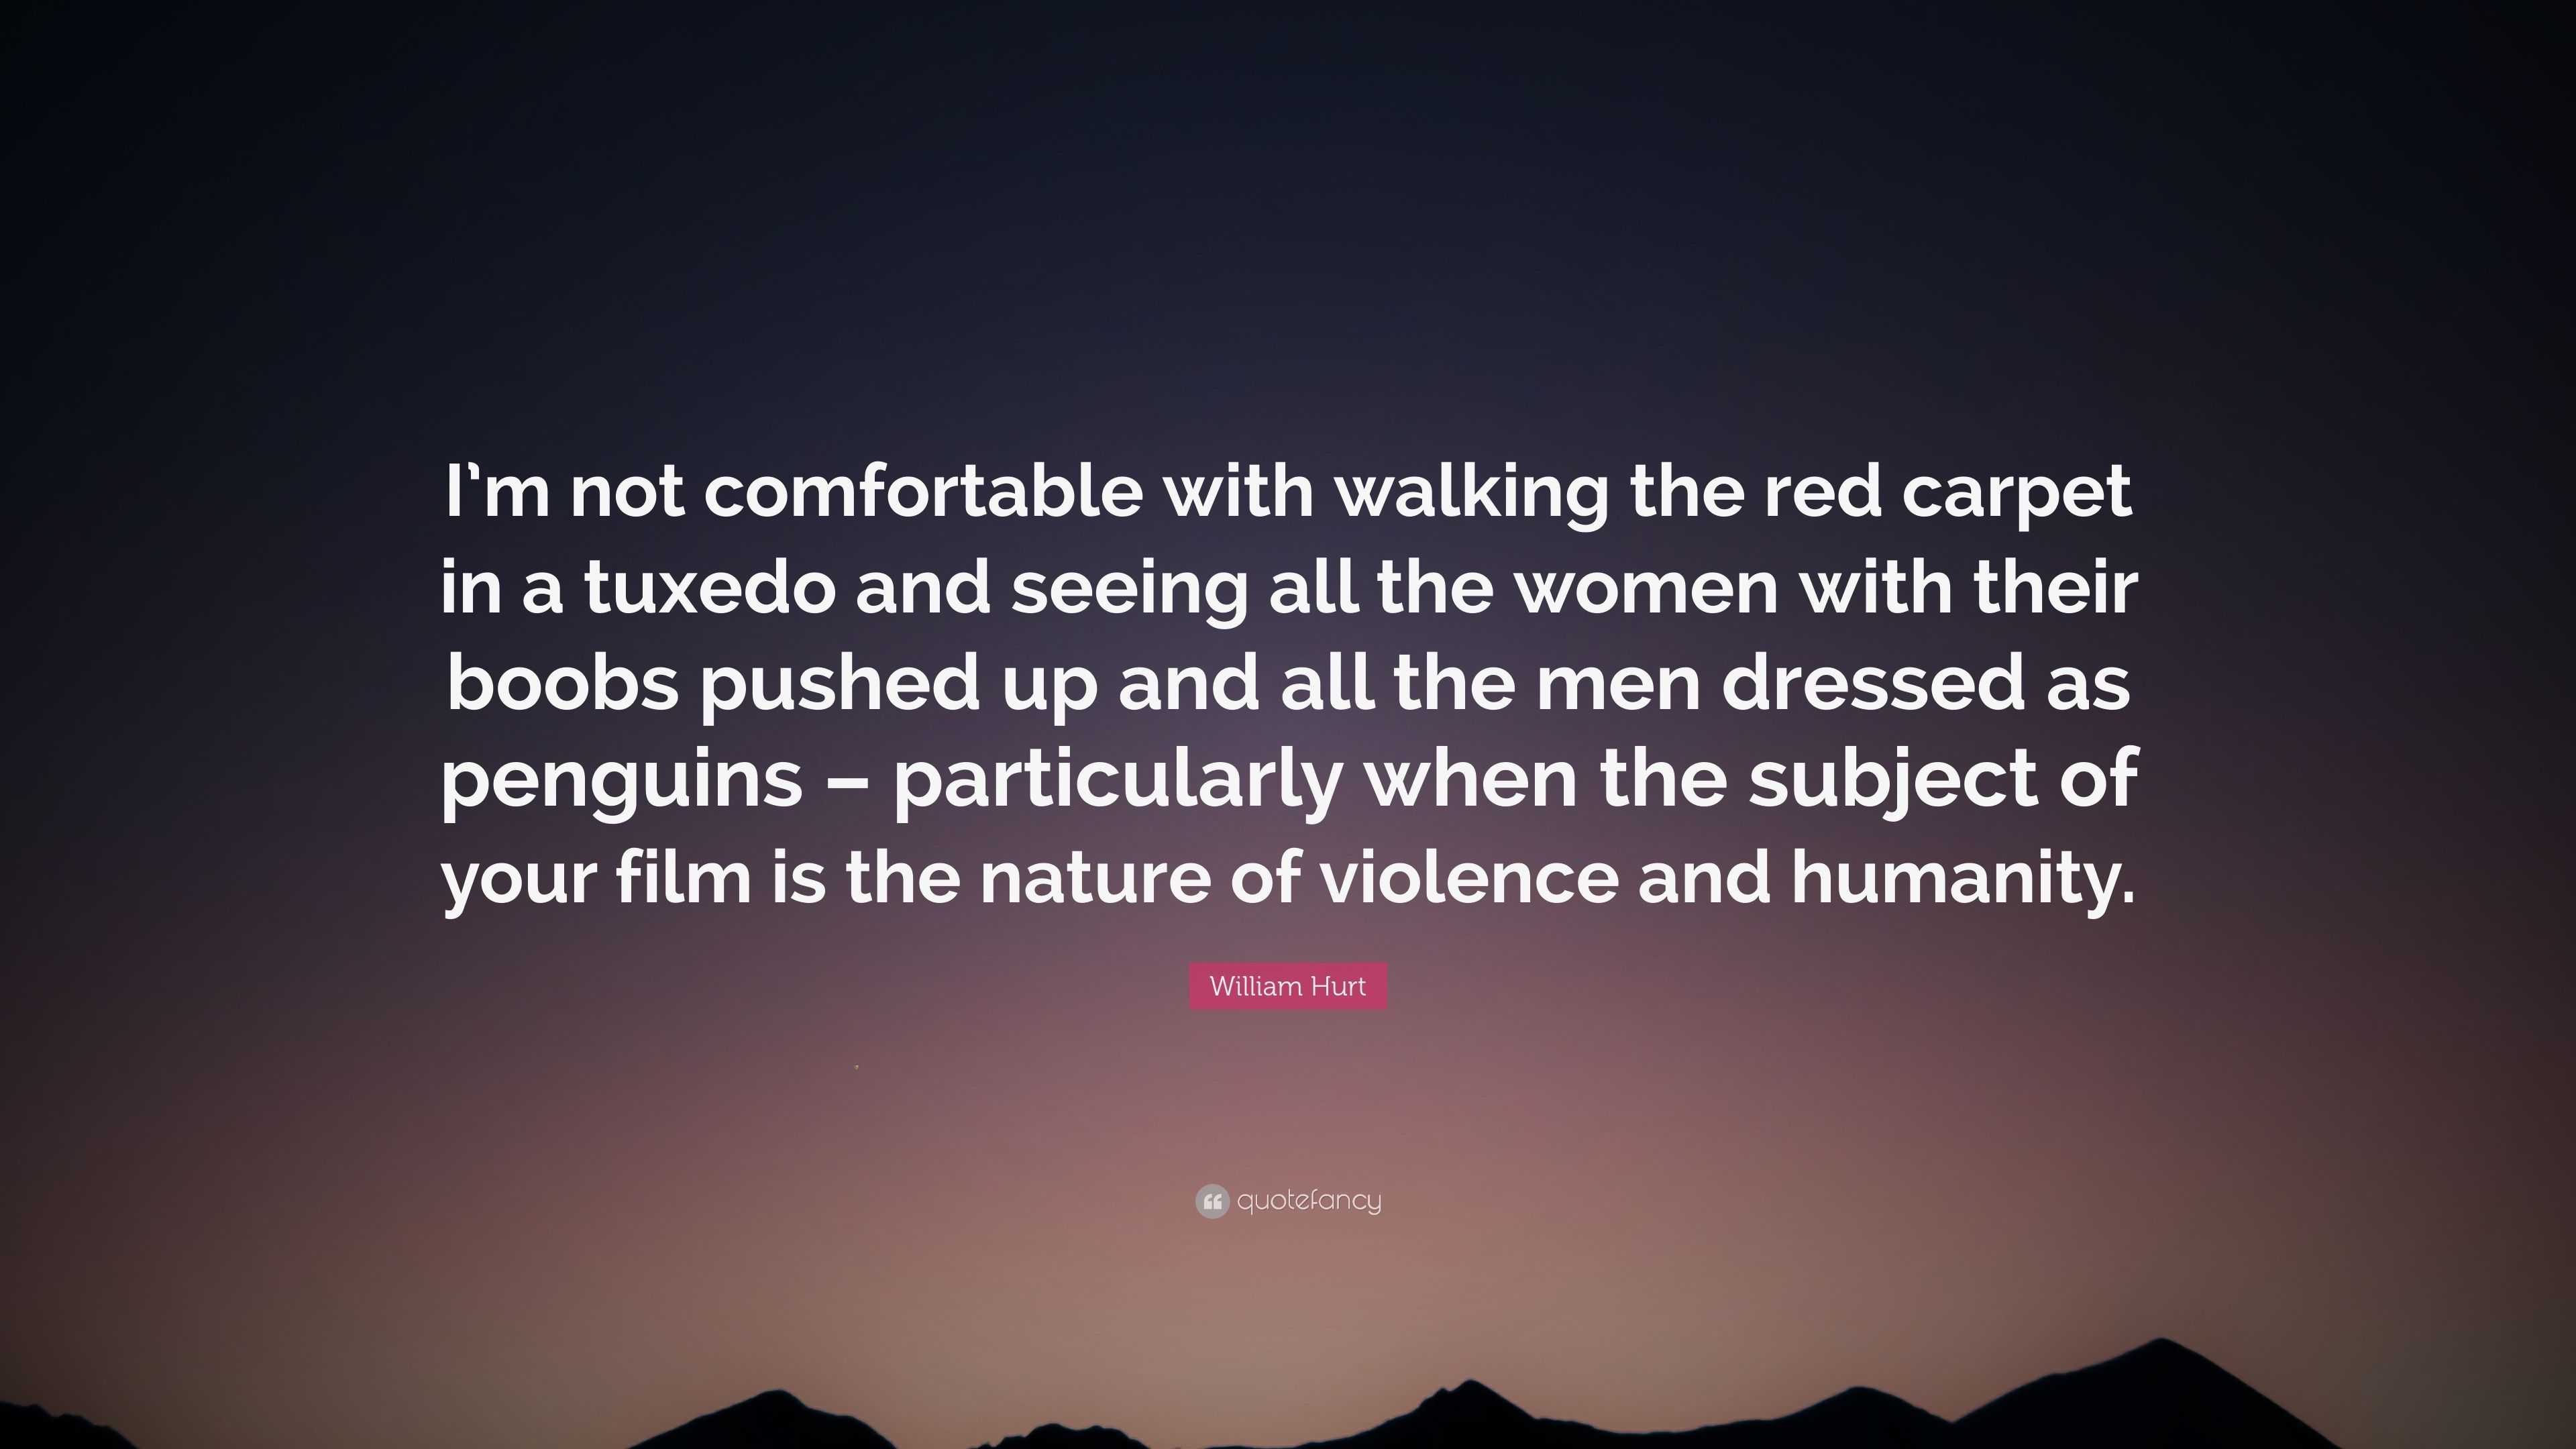 William Hurt Quote: “I'm not comfortable with walking the red